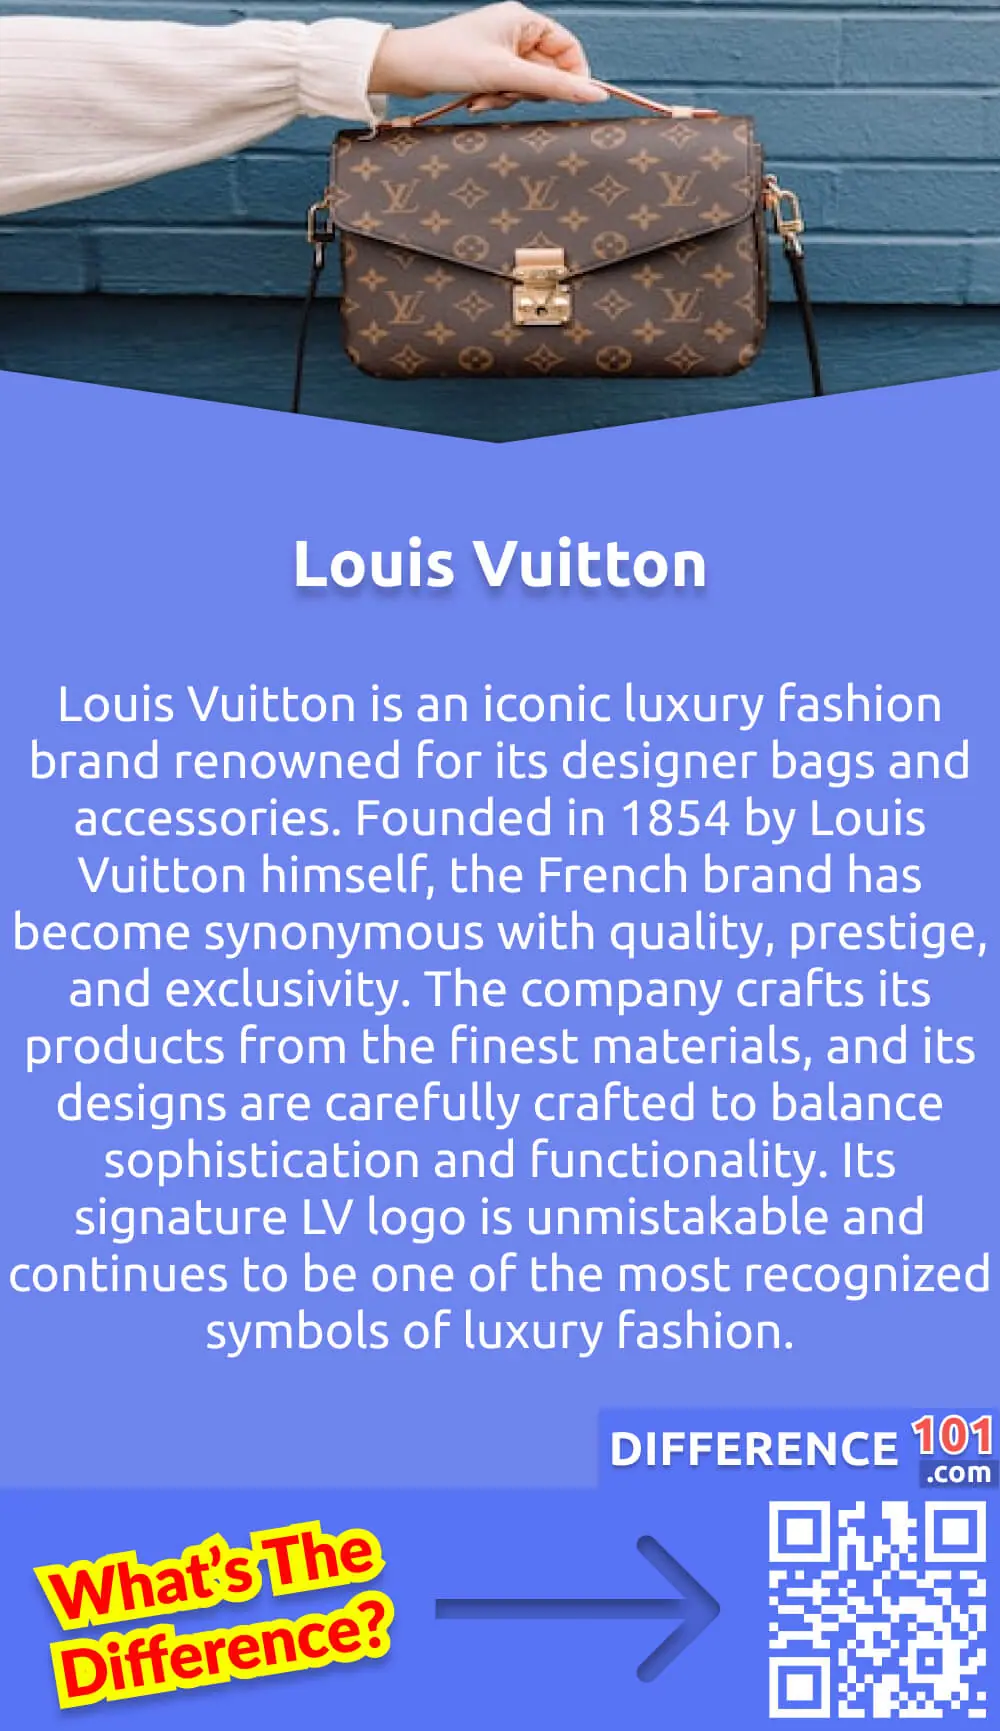 Are Christian Louboutin and Louis Vuitton the same  Quora